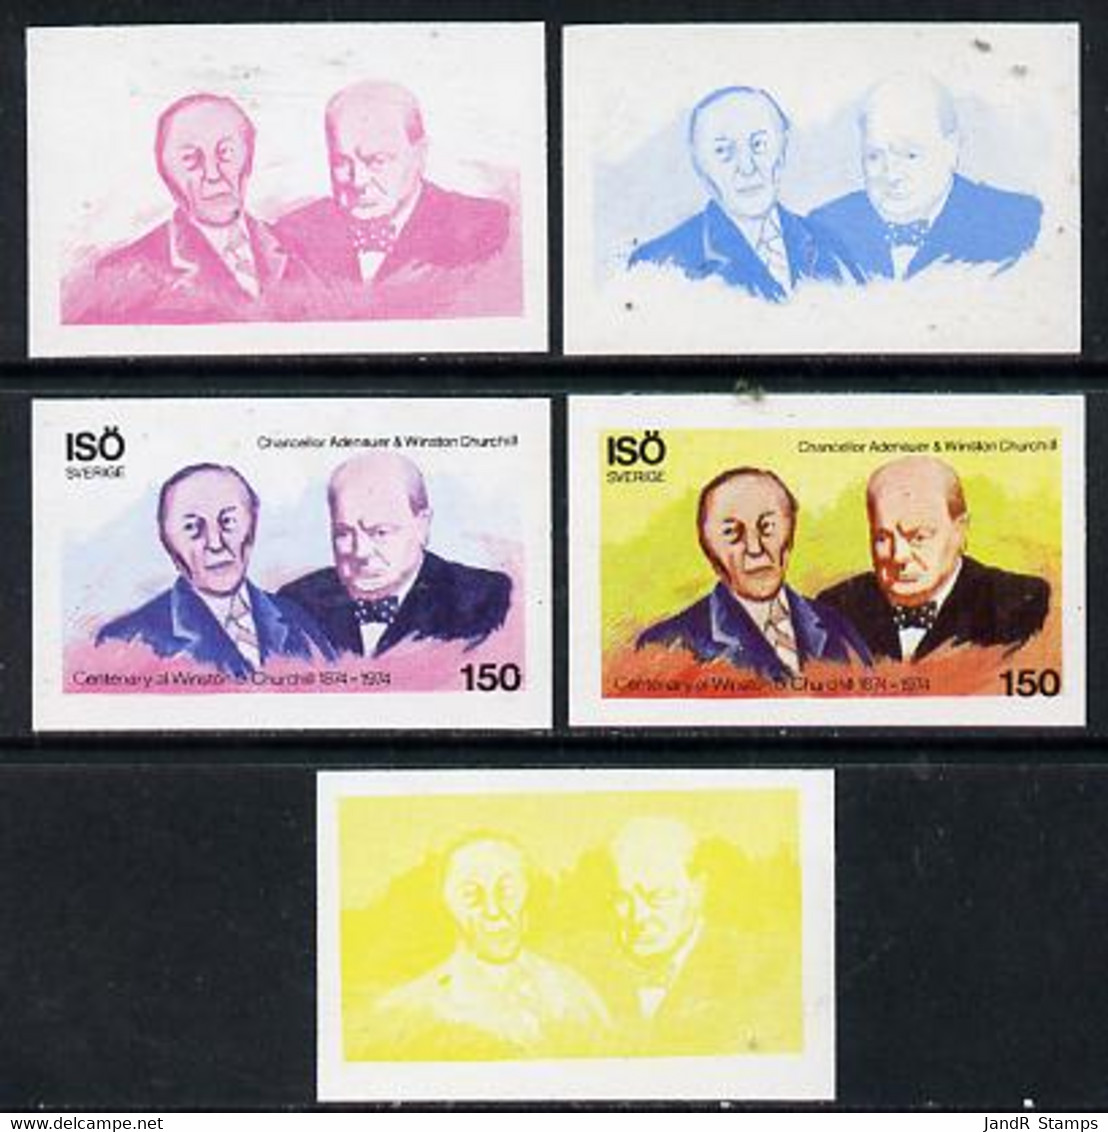 Iso - Sweden 1974 Churchill Birth Centenary 150 (with Adenauer) Set Of 5 Imperf Progressive Colour Proofs Comprising 3 I - Local Post Stamps